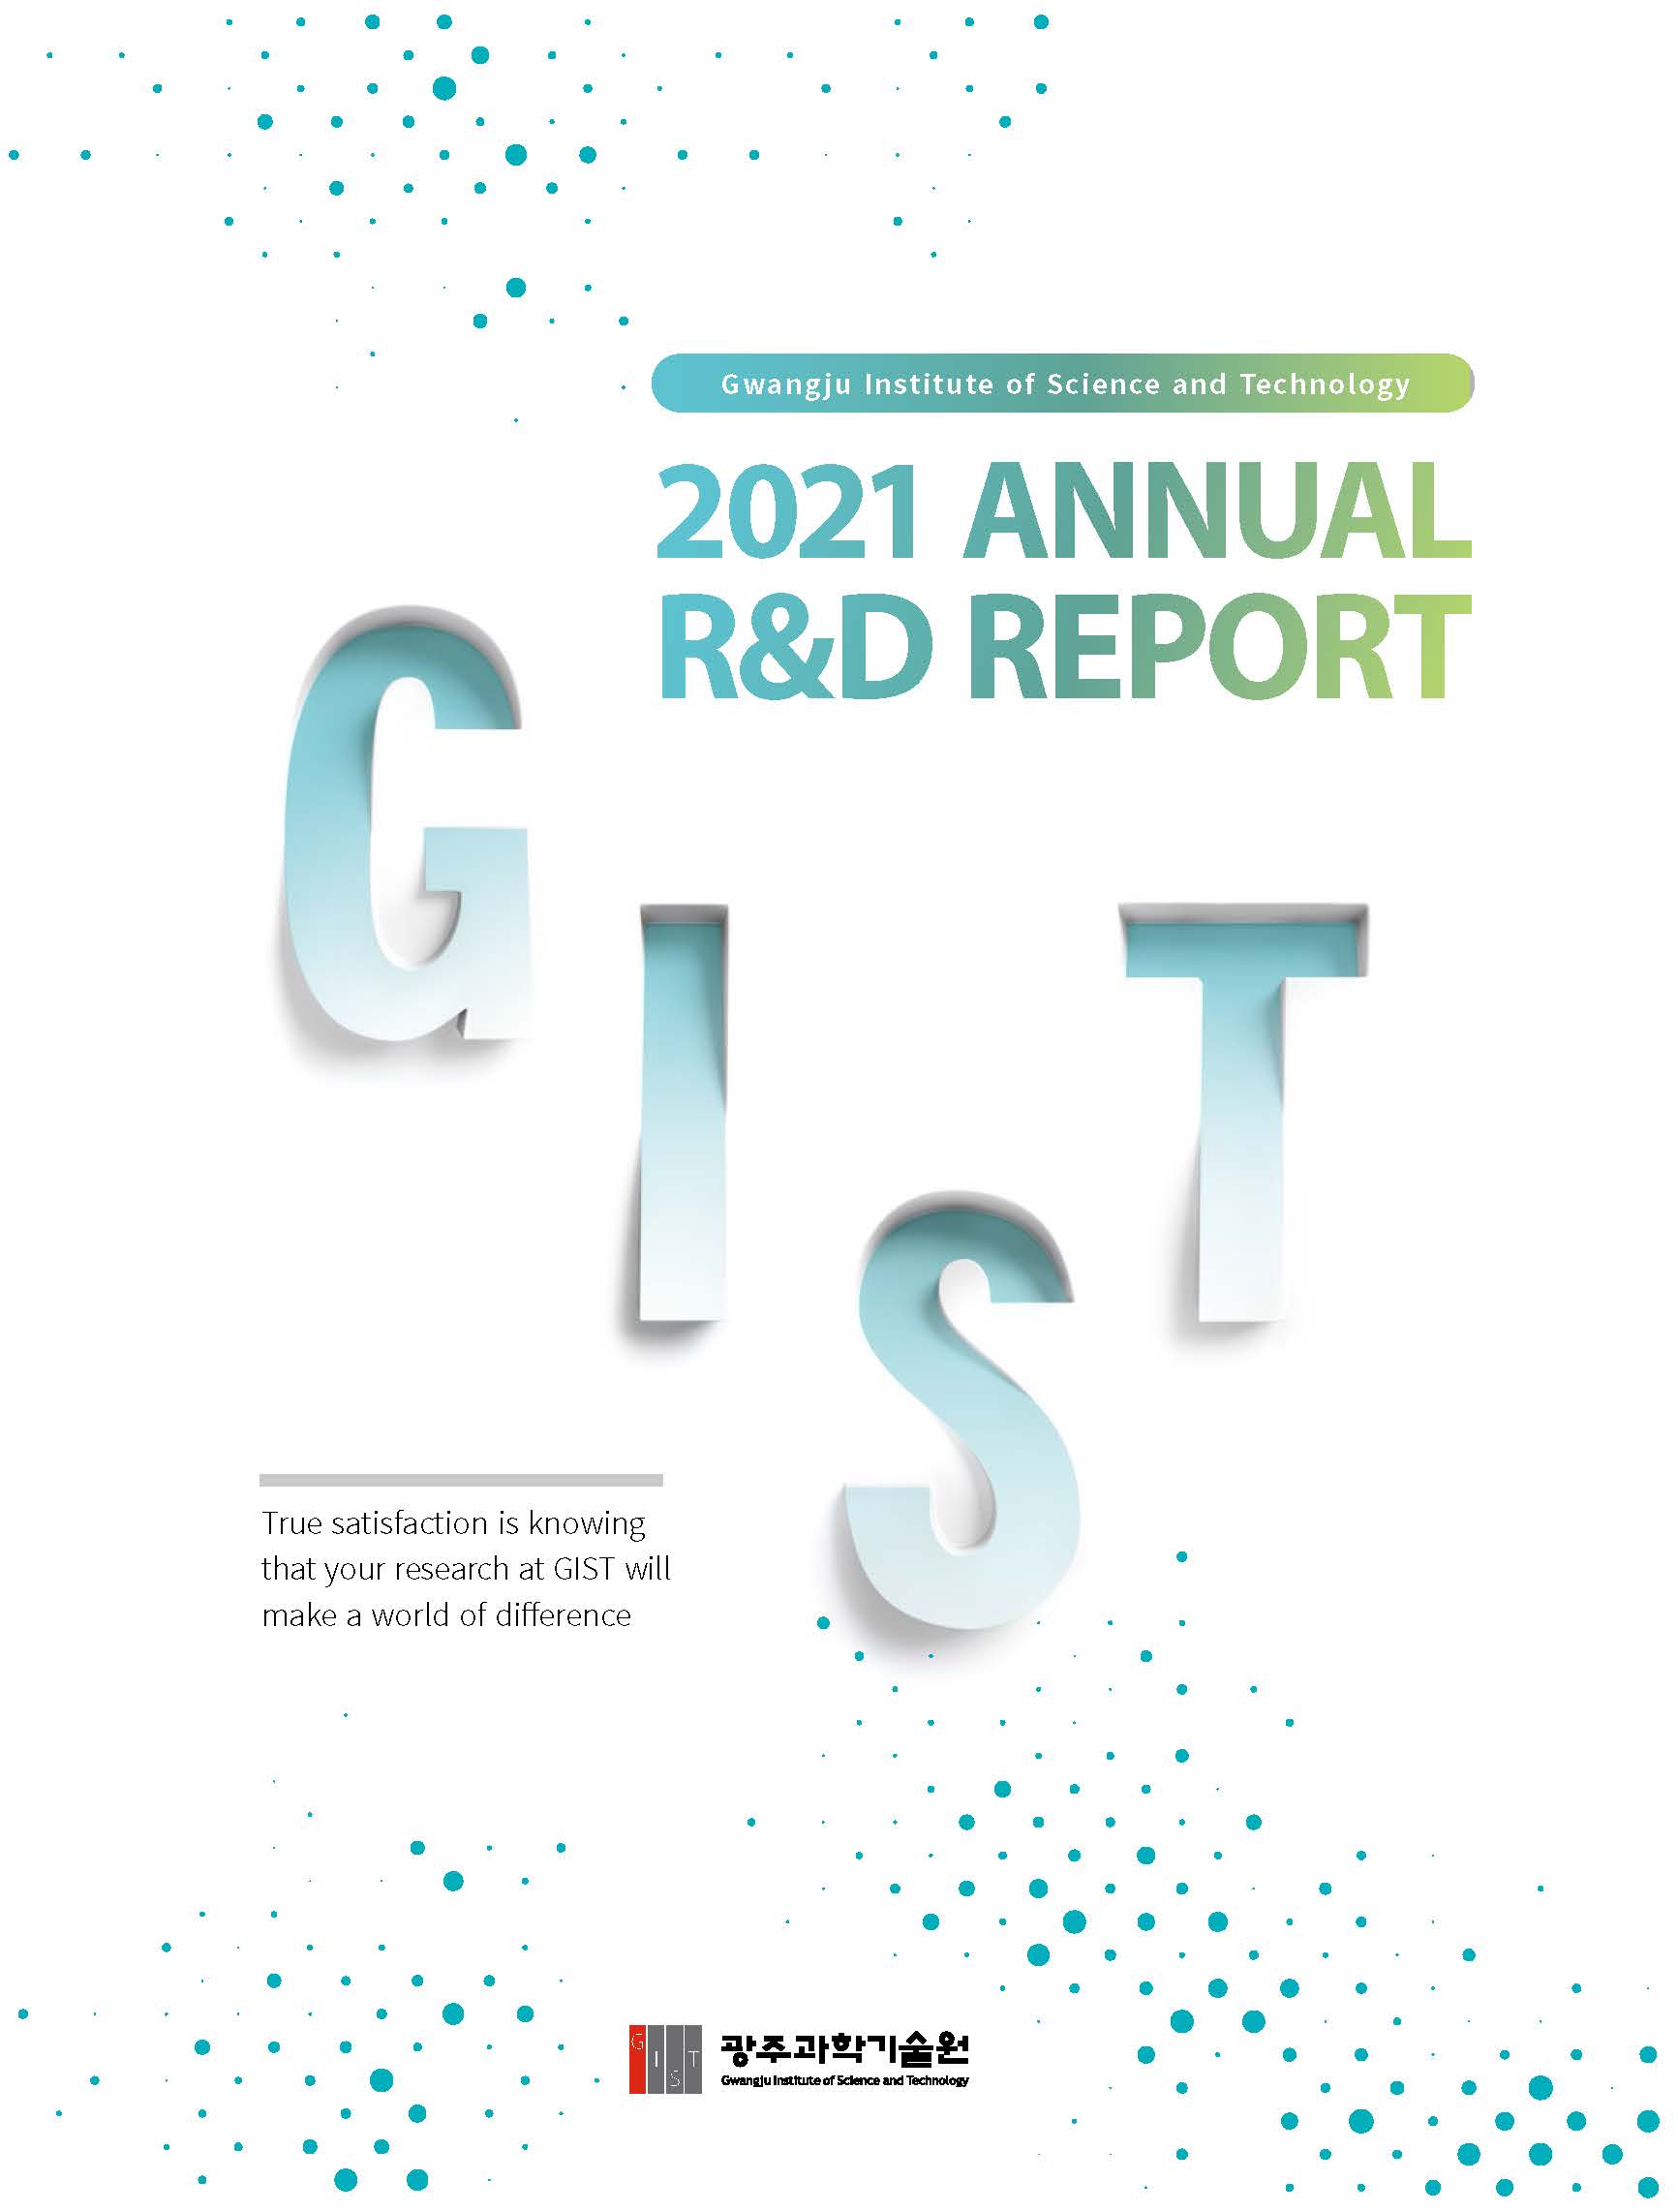 [English] GIST ANNUAL R&D REPORT 2021 이미지